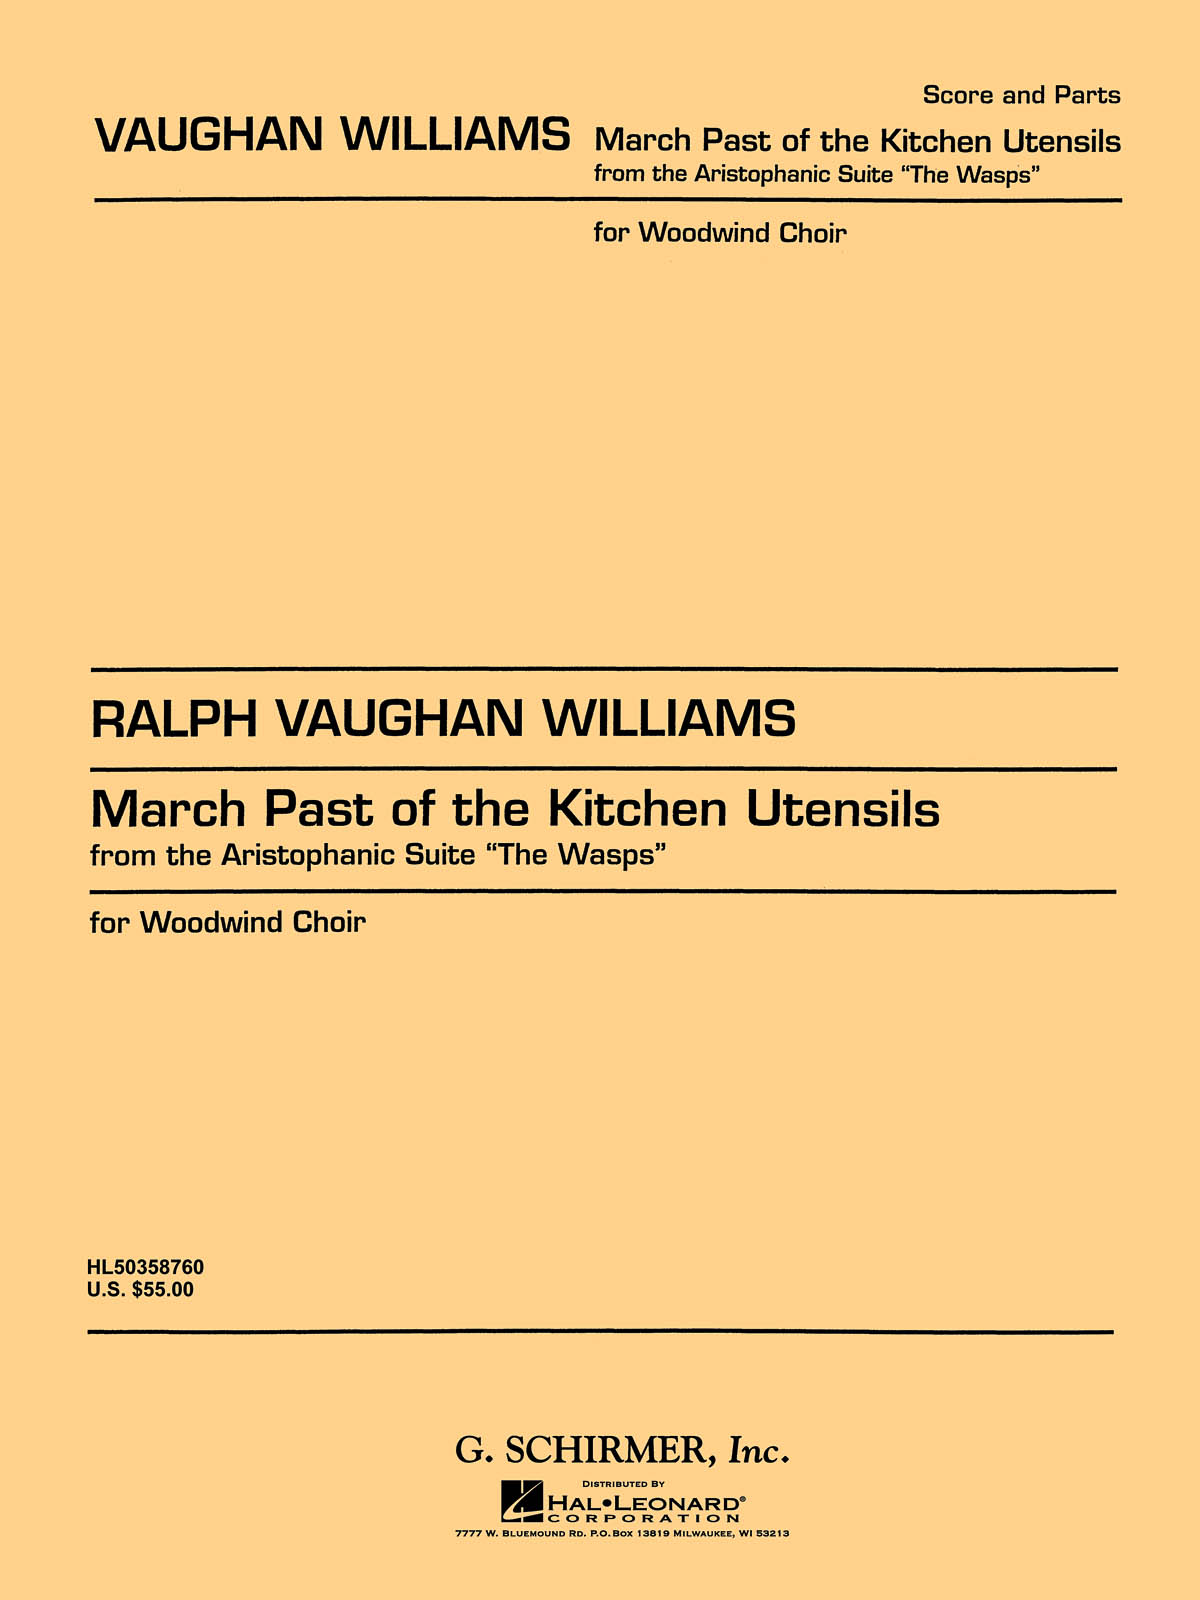 Ralph Vaughan Williams: March Past Of The Kitchen Utensils